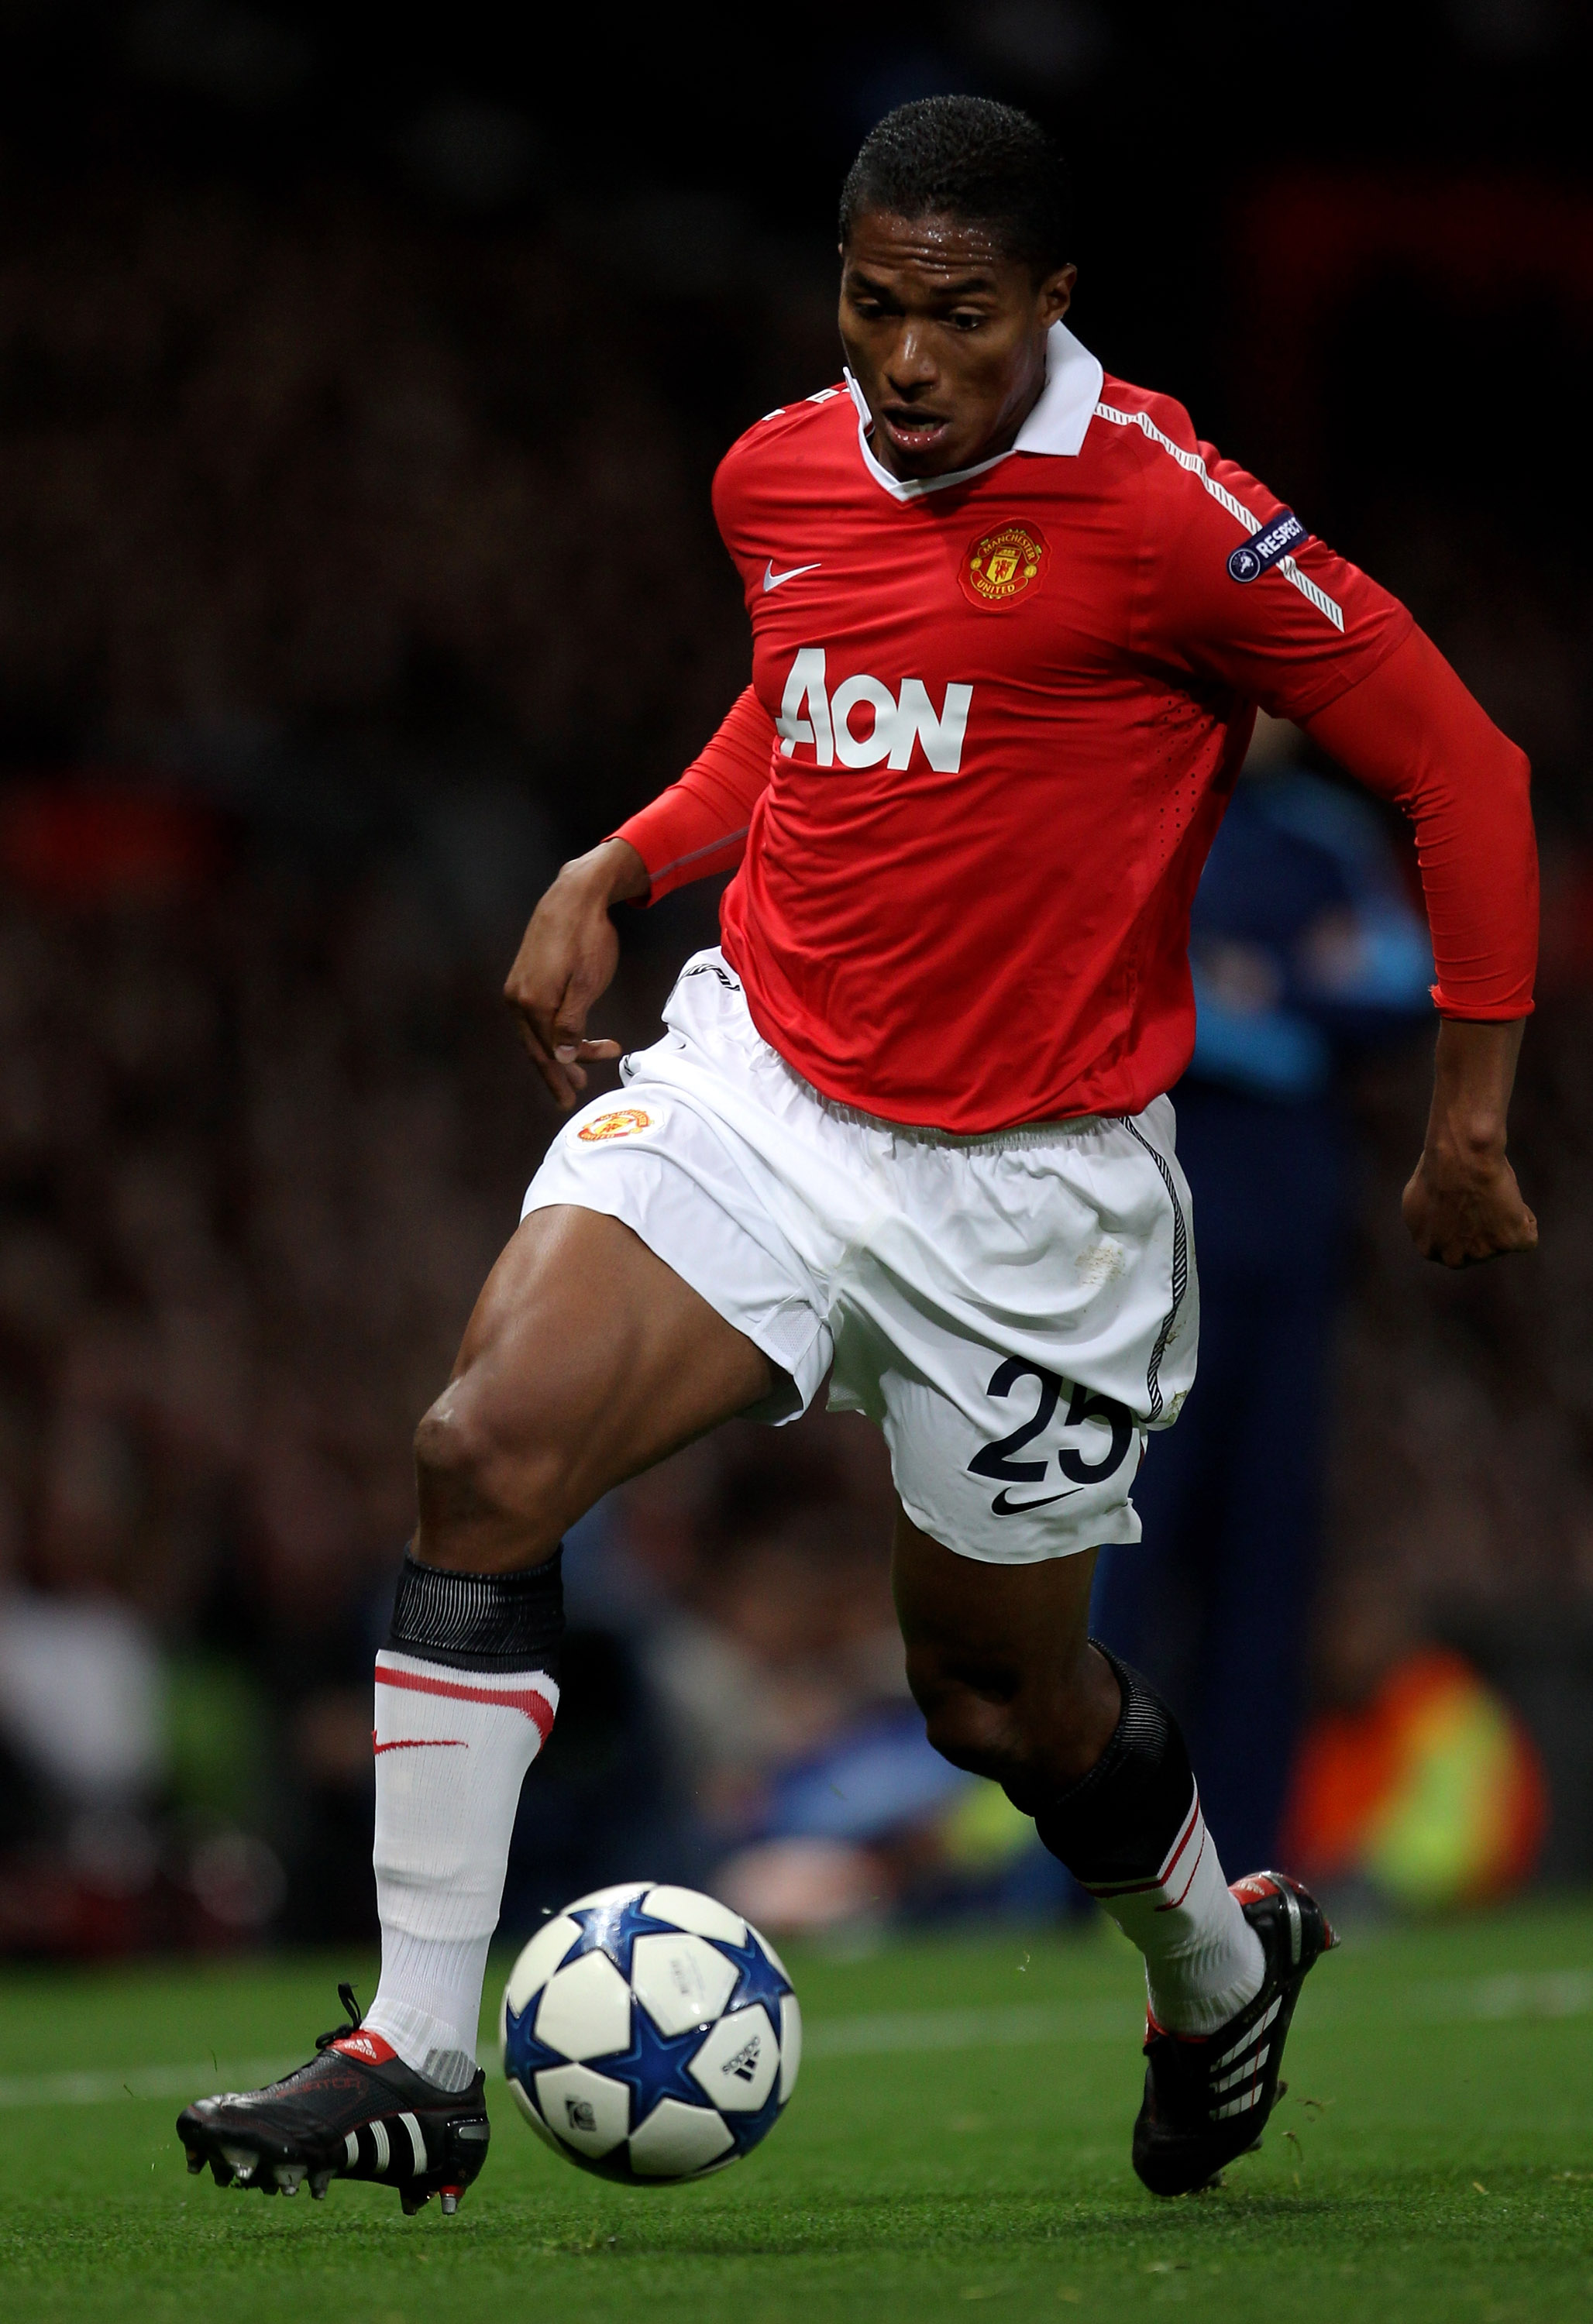 MANCHESTER, ENGLAND - SEPTEMBER 14:  Antonio Valencia of Manchester United in action during the UEFA Champions League Group C match between Manchester United and Rangers at Old Trafford on September 14, 2010 in Manchester, England.  (Photo by Alex Livesey